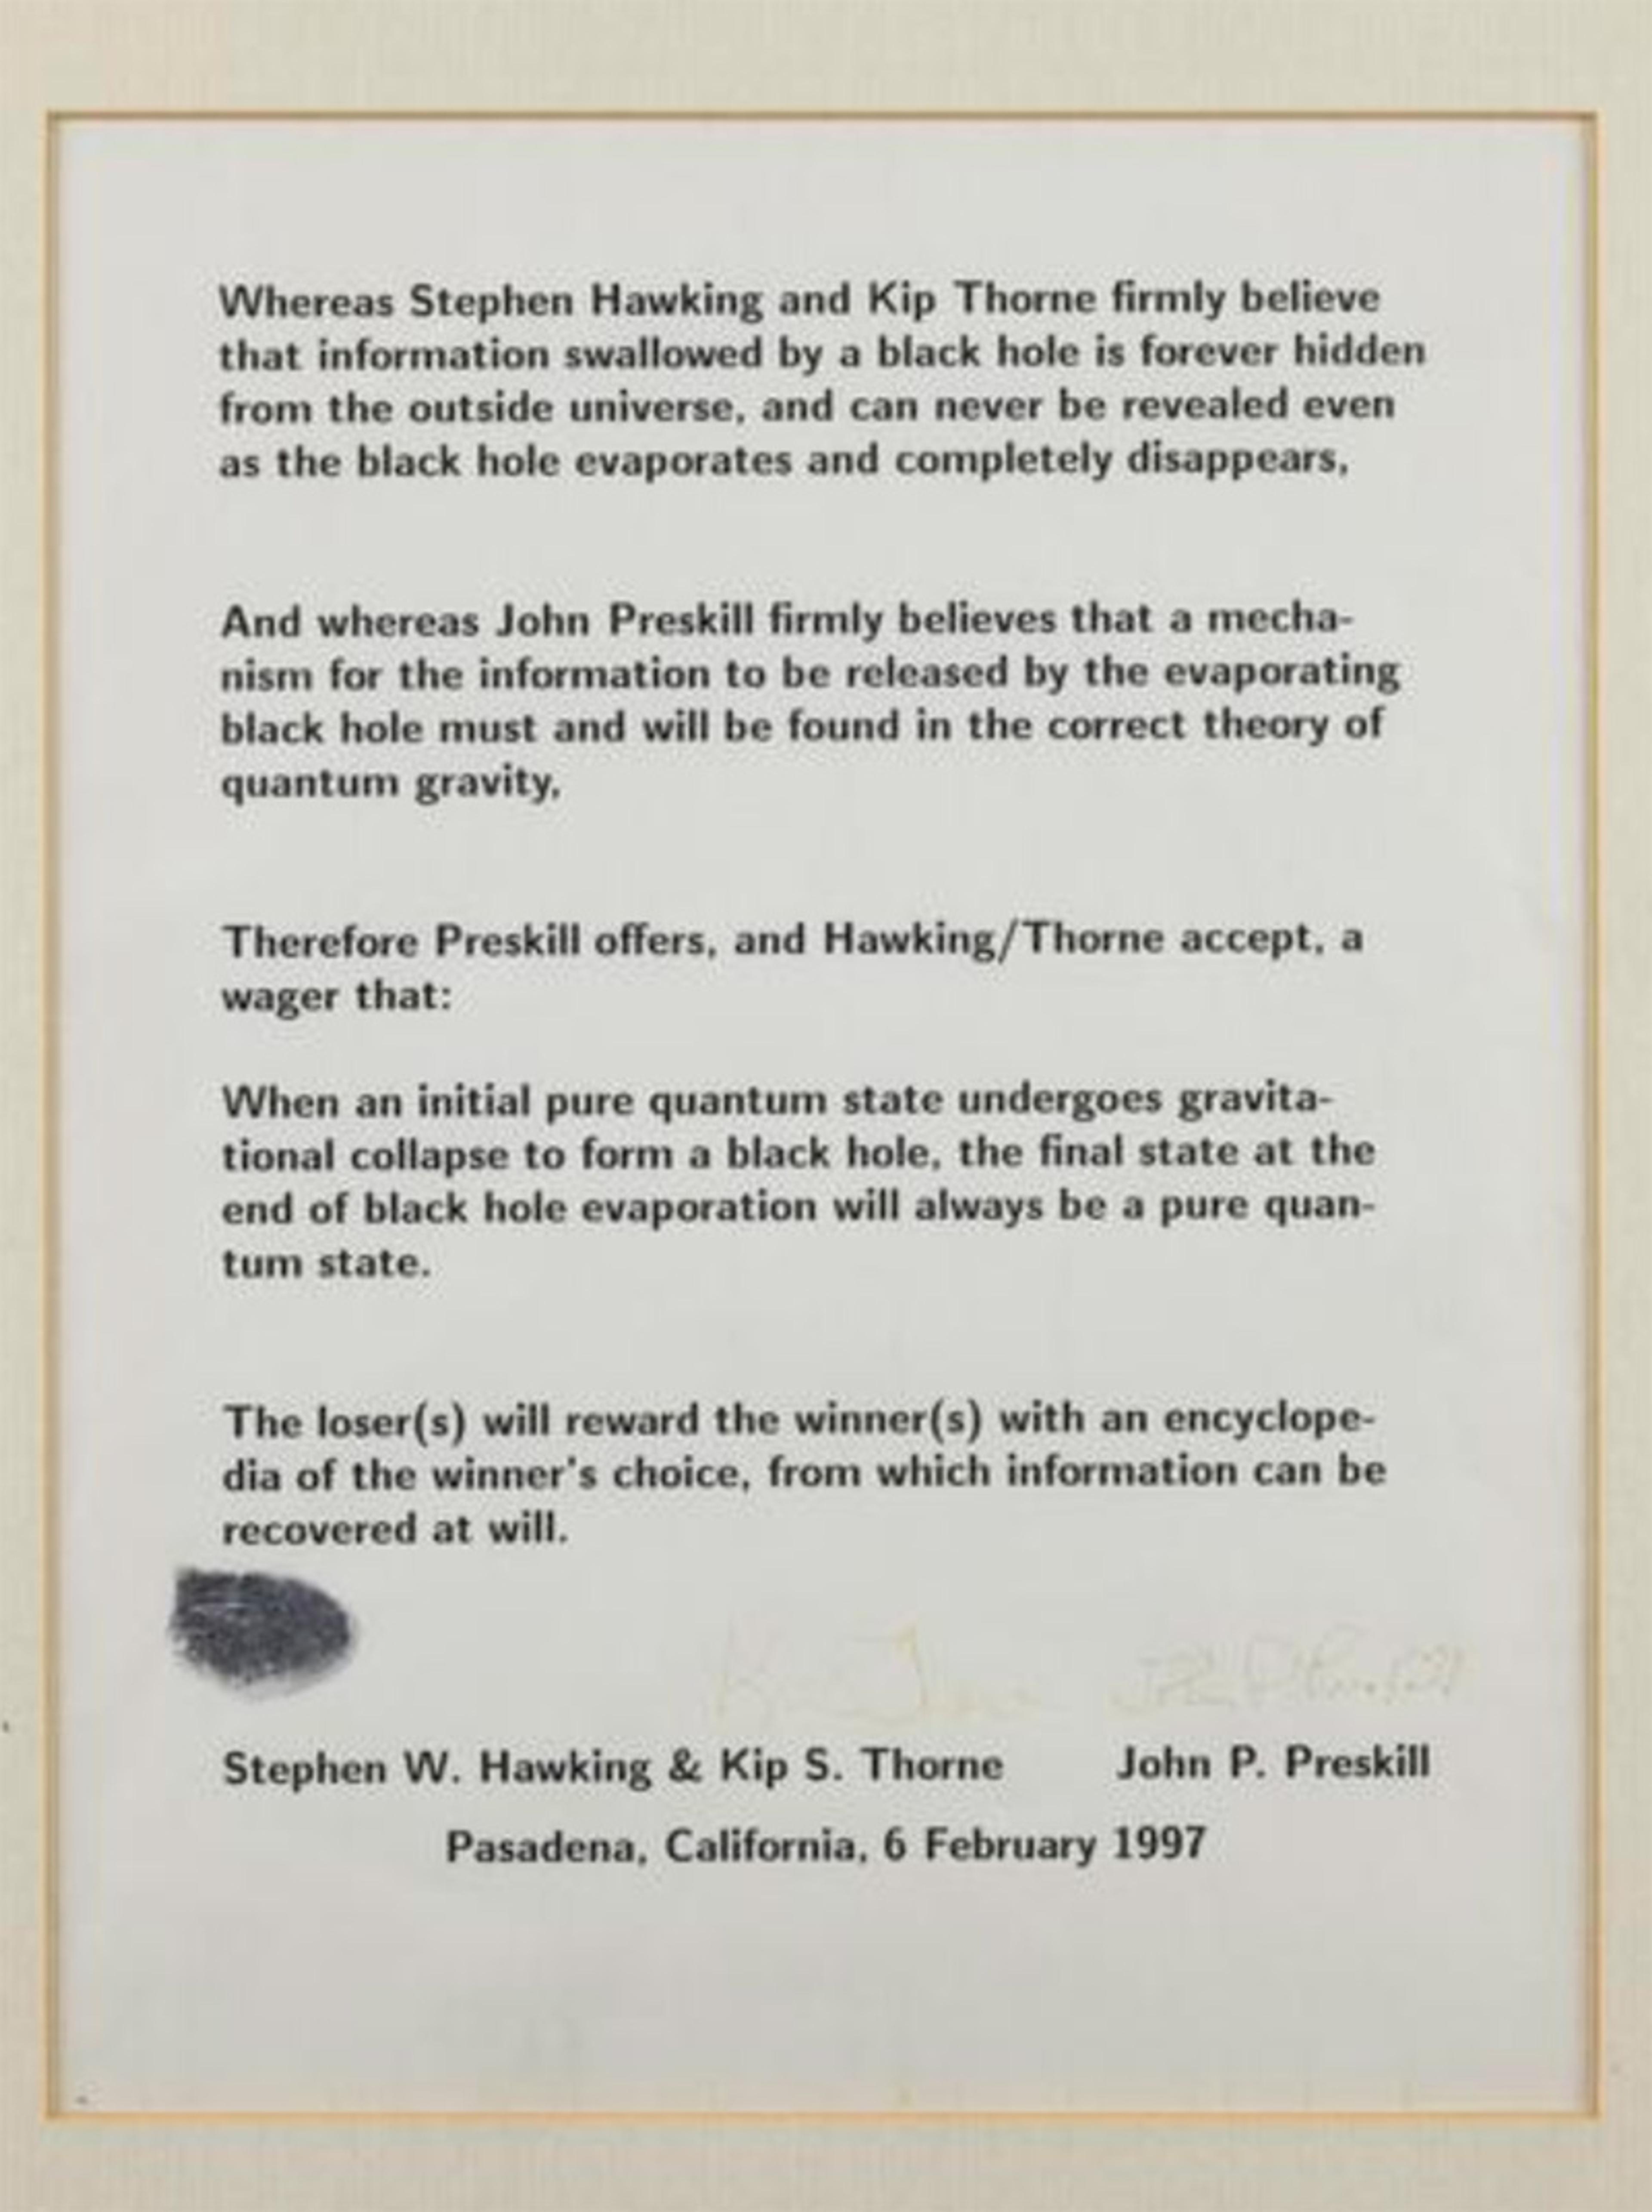 A document detailing a wager about the fate of information in black holes between Stephen Hawking, Kip Thorne, and John Preskill. It states the terms of the bet, with the loser(s) promising to give the winner(s) an encyclopedia. The document is dated 6 February 1997.